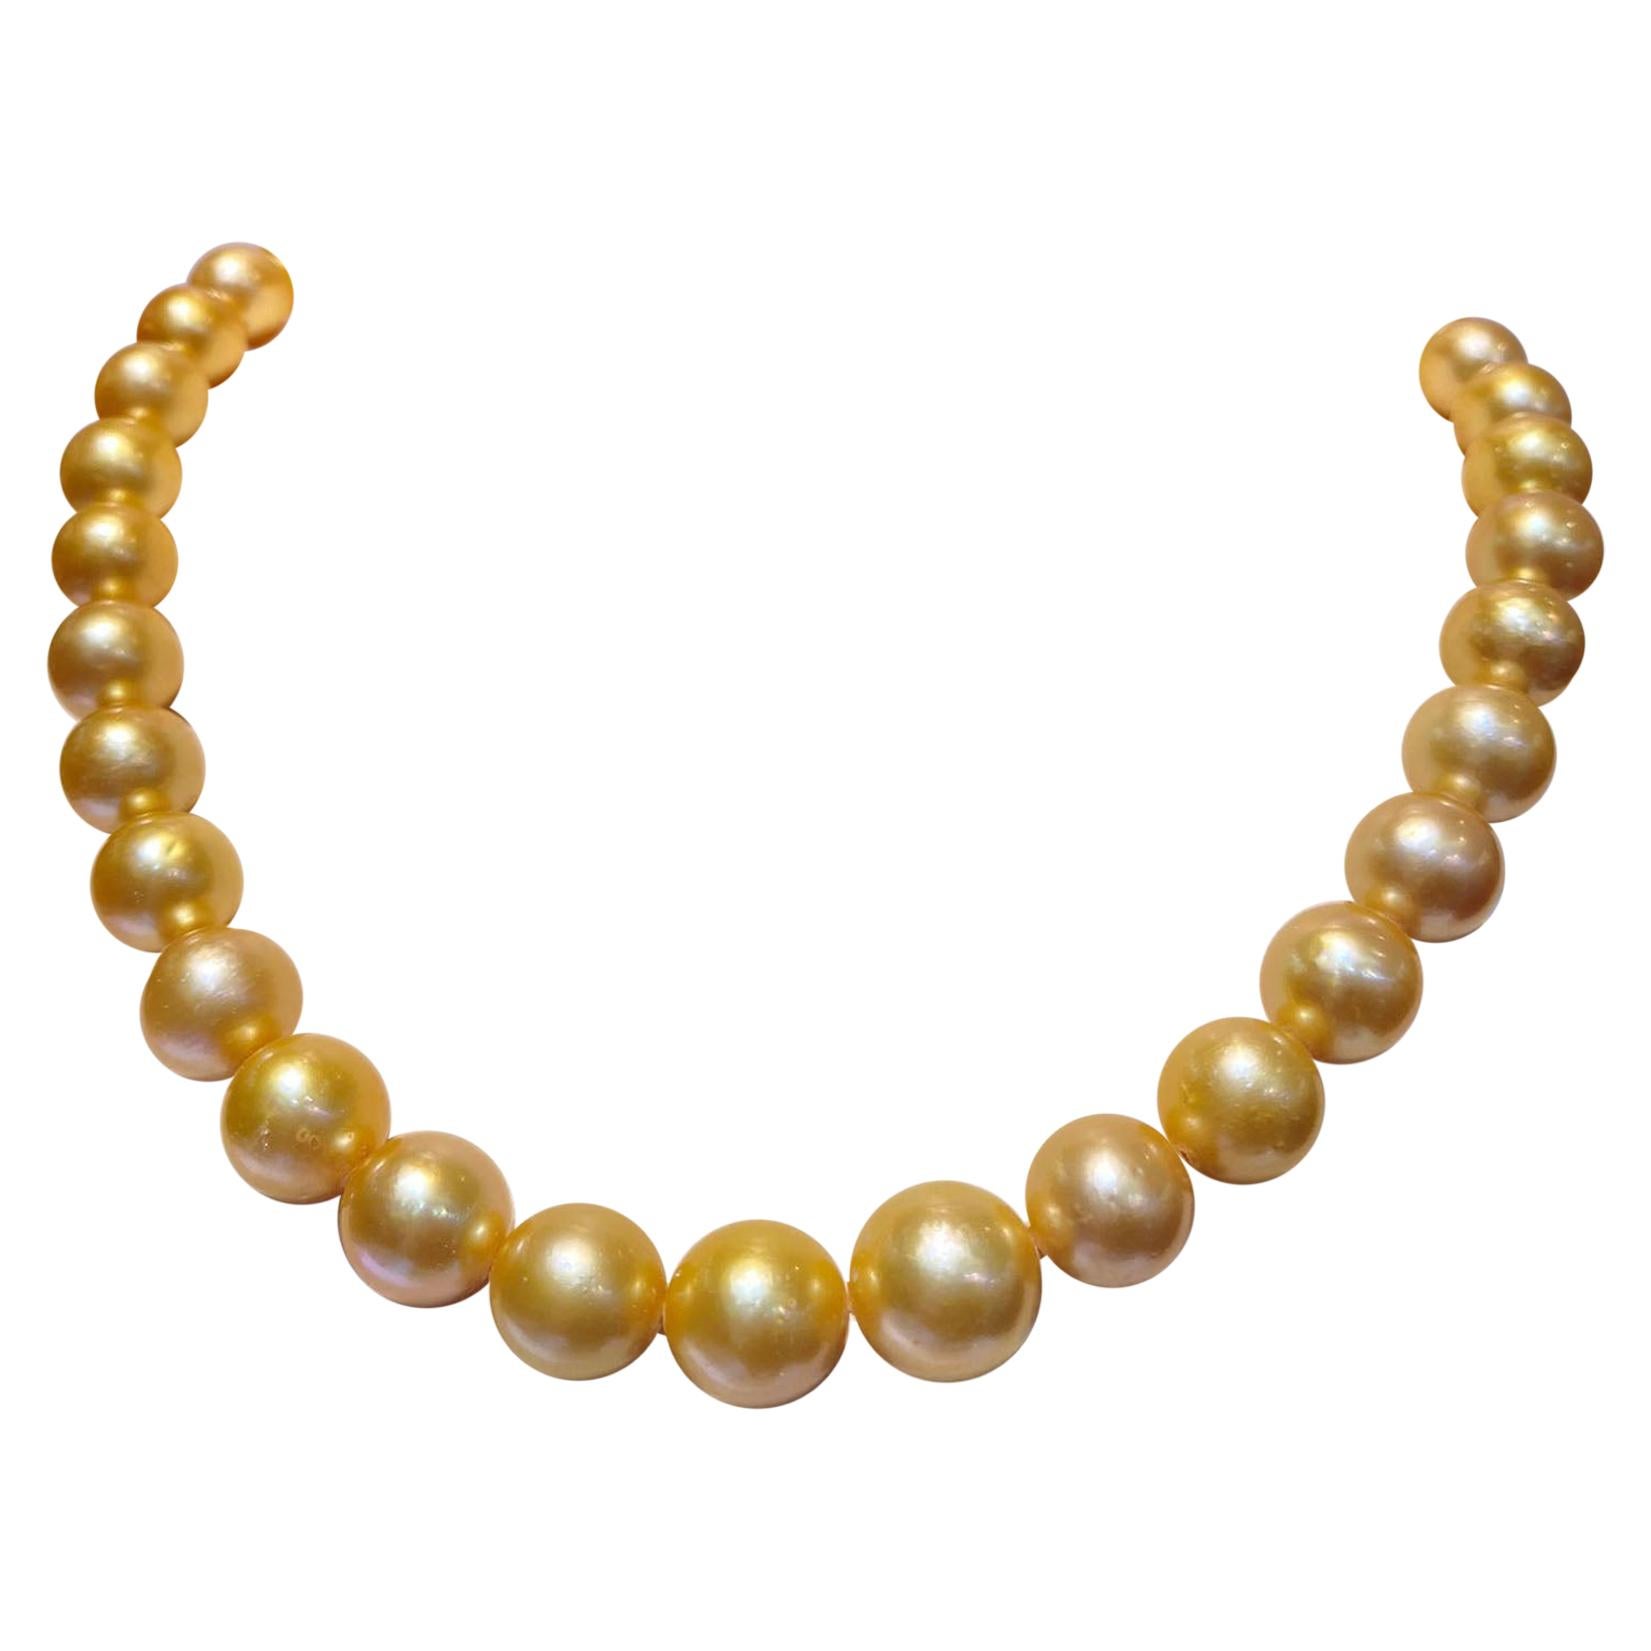 Round Golden South Sea Pearl 37pcs Will Be More When Strung For Sale